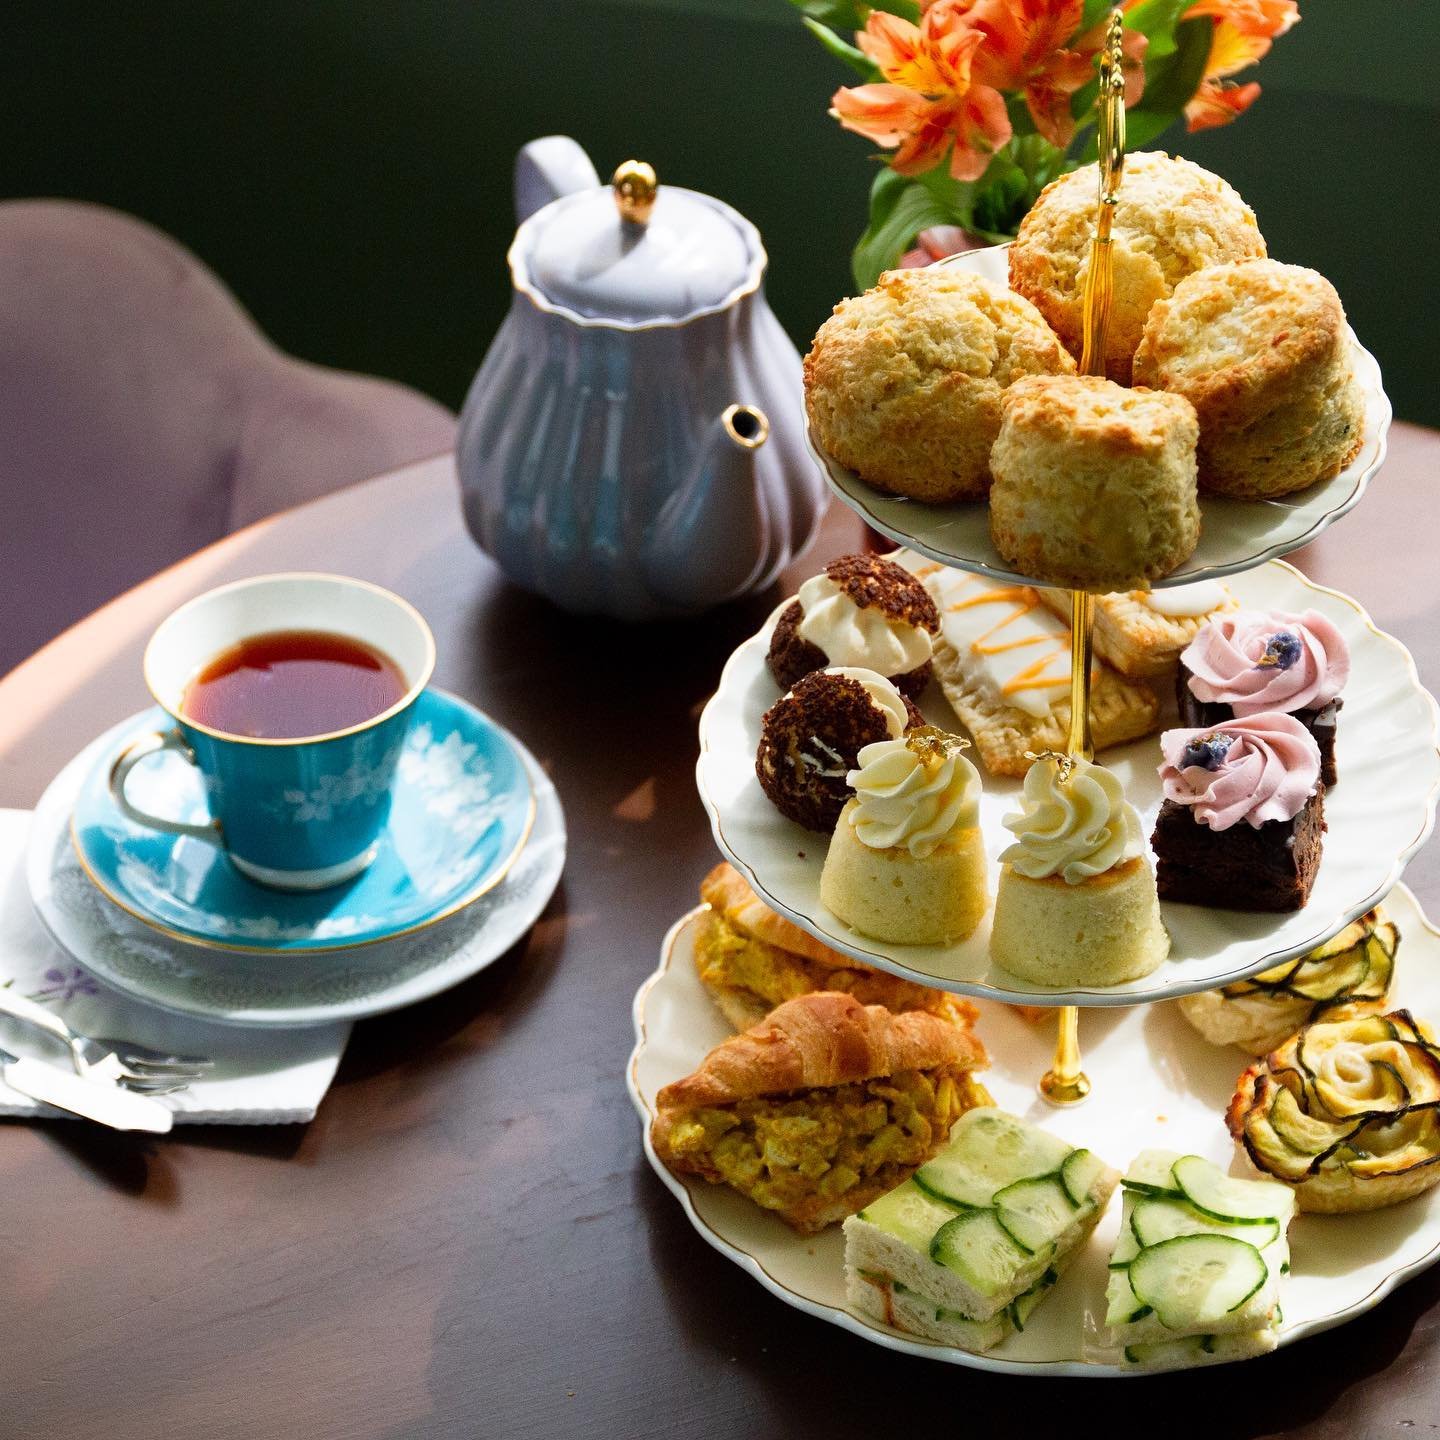 Mother&rsquo;s Day Afternoon Tea at The Lavender Fox! 🥳🦊💜

We are super excited to announce we will be hosting afternoon tea on Sunday May 5th and Sunday May 12th in honour of Mother&rsquo;s Day! (but open to anyone and everyone!!) 🌸🦊🌸

This wi